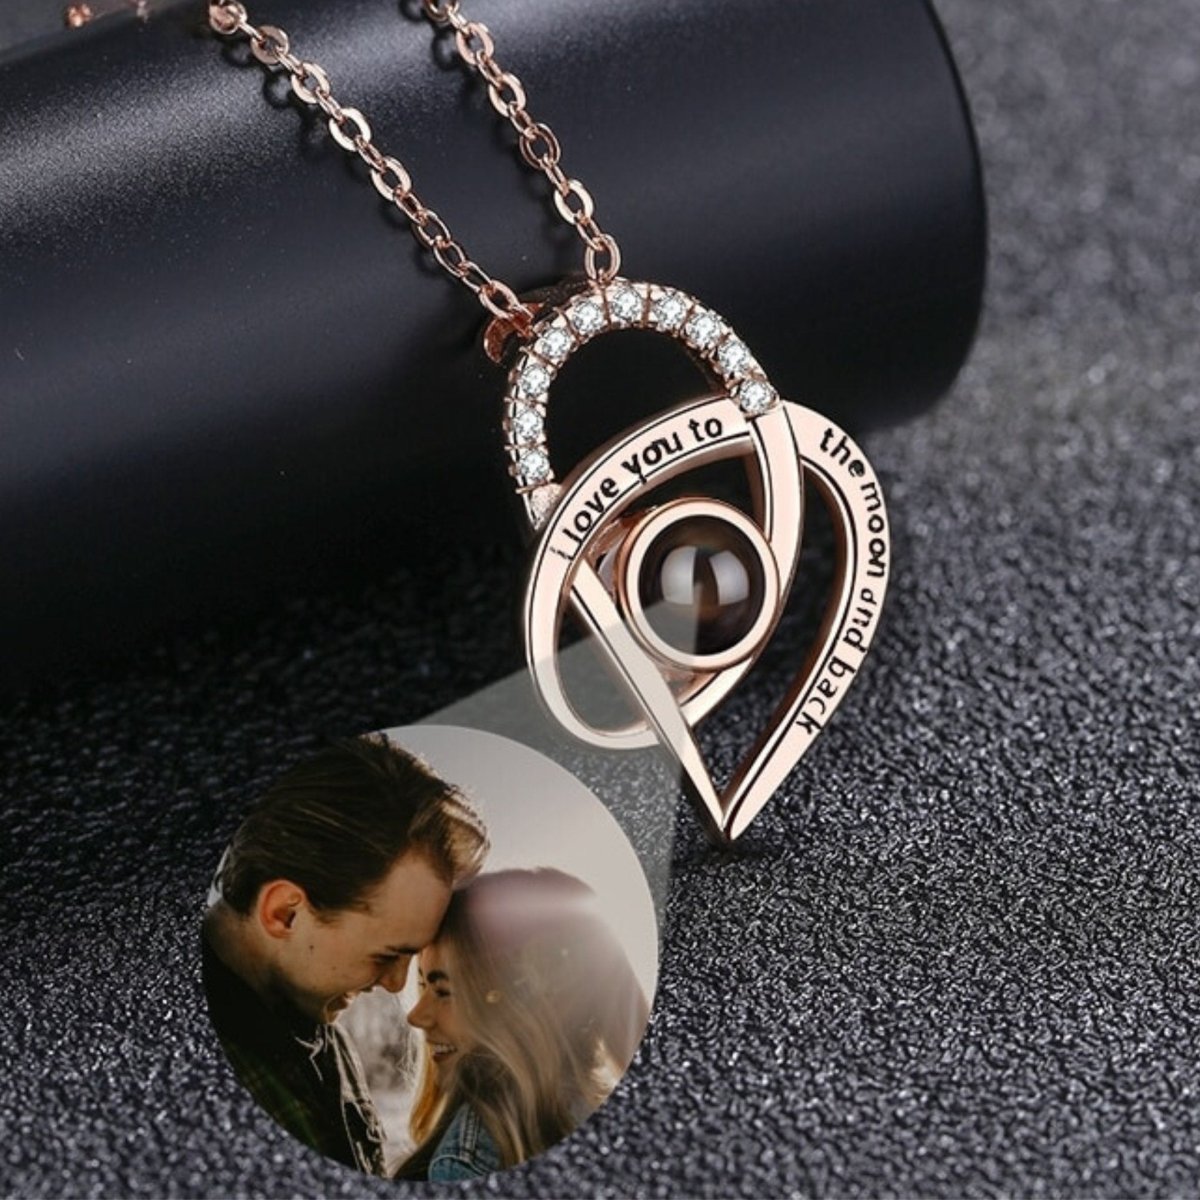 Buy Mother's Day Necklace, Mom Photo Projection Necklace, Mothers Jewelry  Gift, Personalised Picture Projection Jewelry Online in India - Etsy